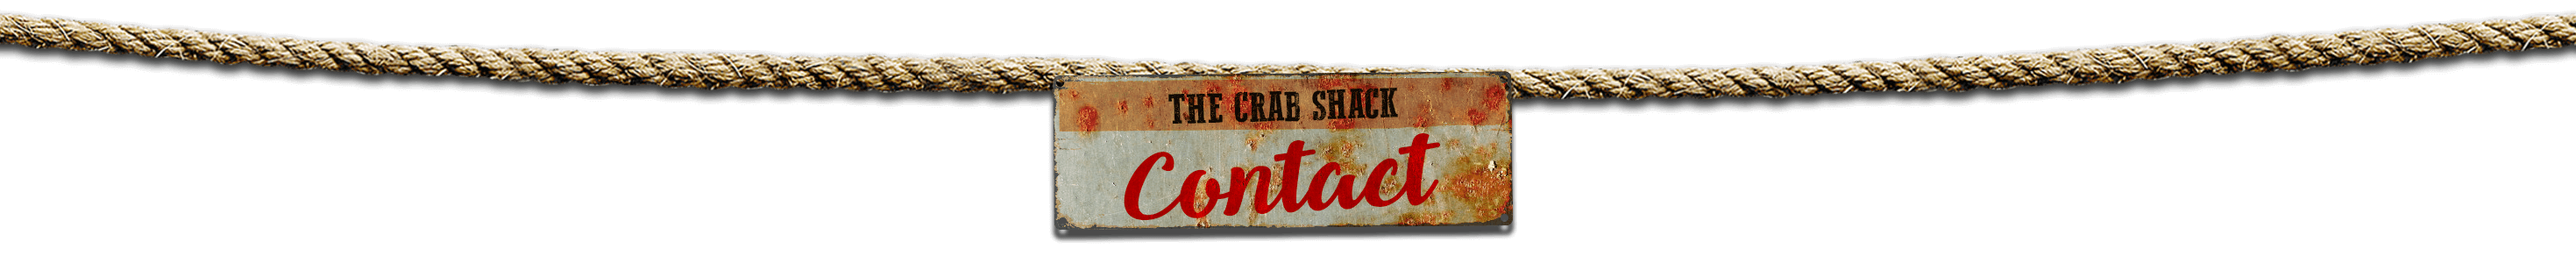 contact-the-crab-shack